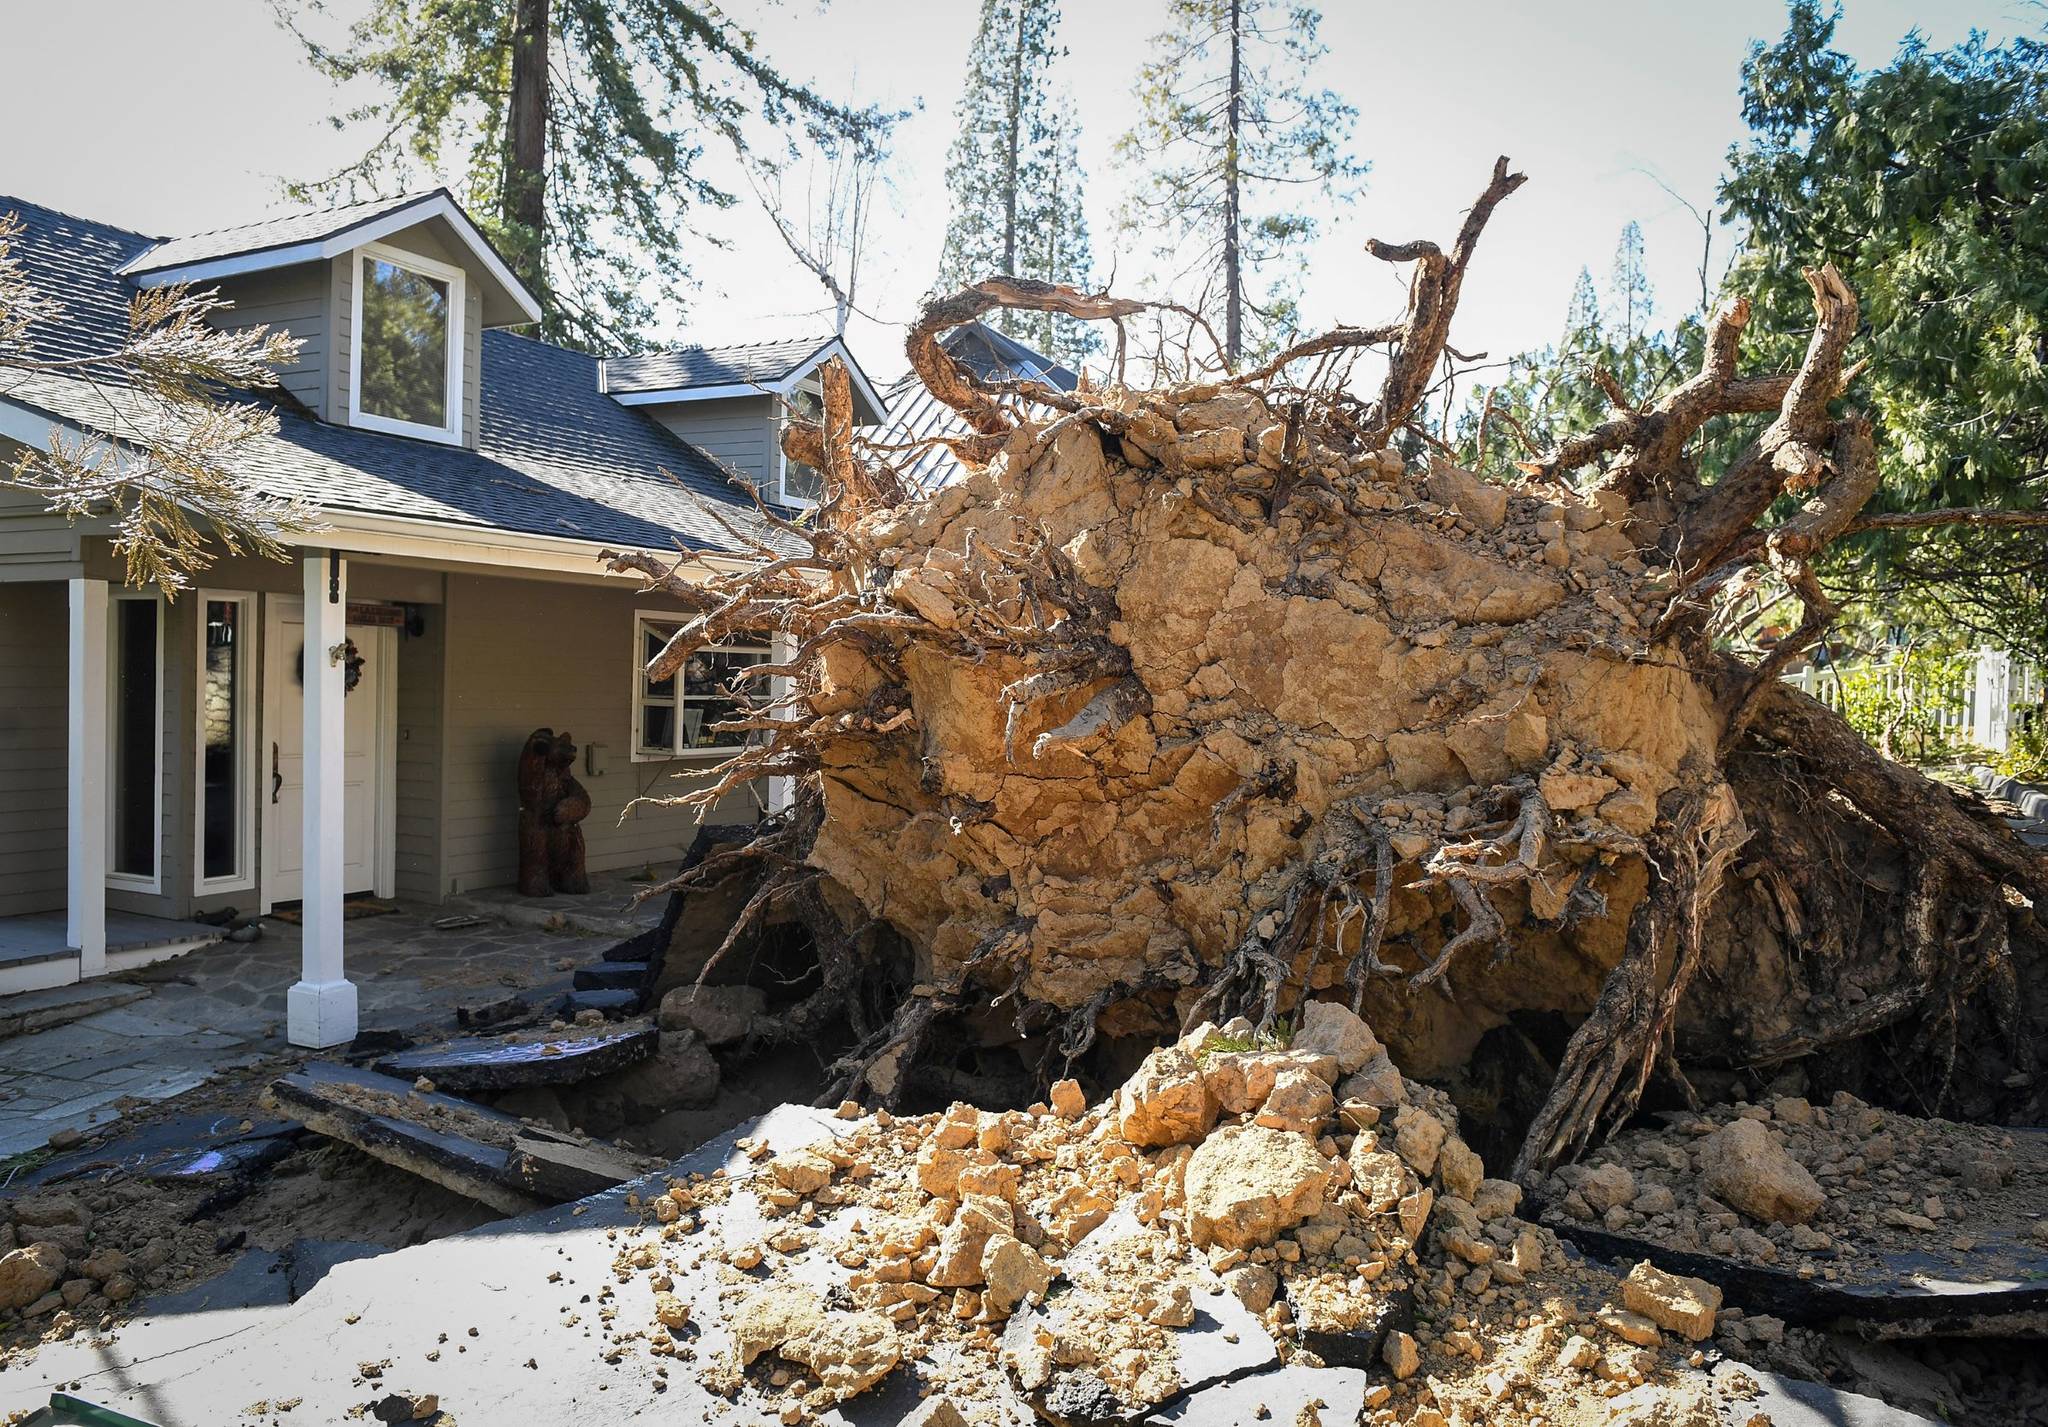 Craid Kohlruss/The Fresno Bee 
Powerful winds, known as Mono winds, reached higher-than-normal levels — in some places, over 100 mph — and resulted in unprecedented, widespread devastation. Hundreds of trees in the Sierra Nevada were toppled Monday night into early Tuesday, and dozens of homes and vehicles were crushed in rural mountain towns.